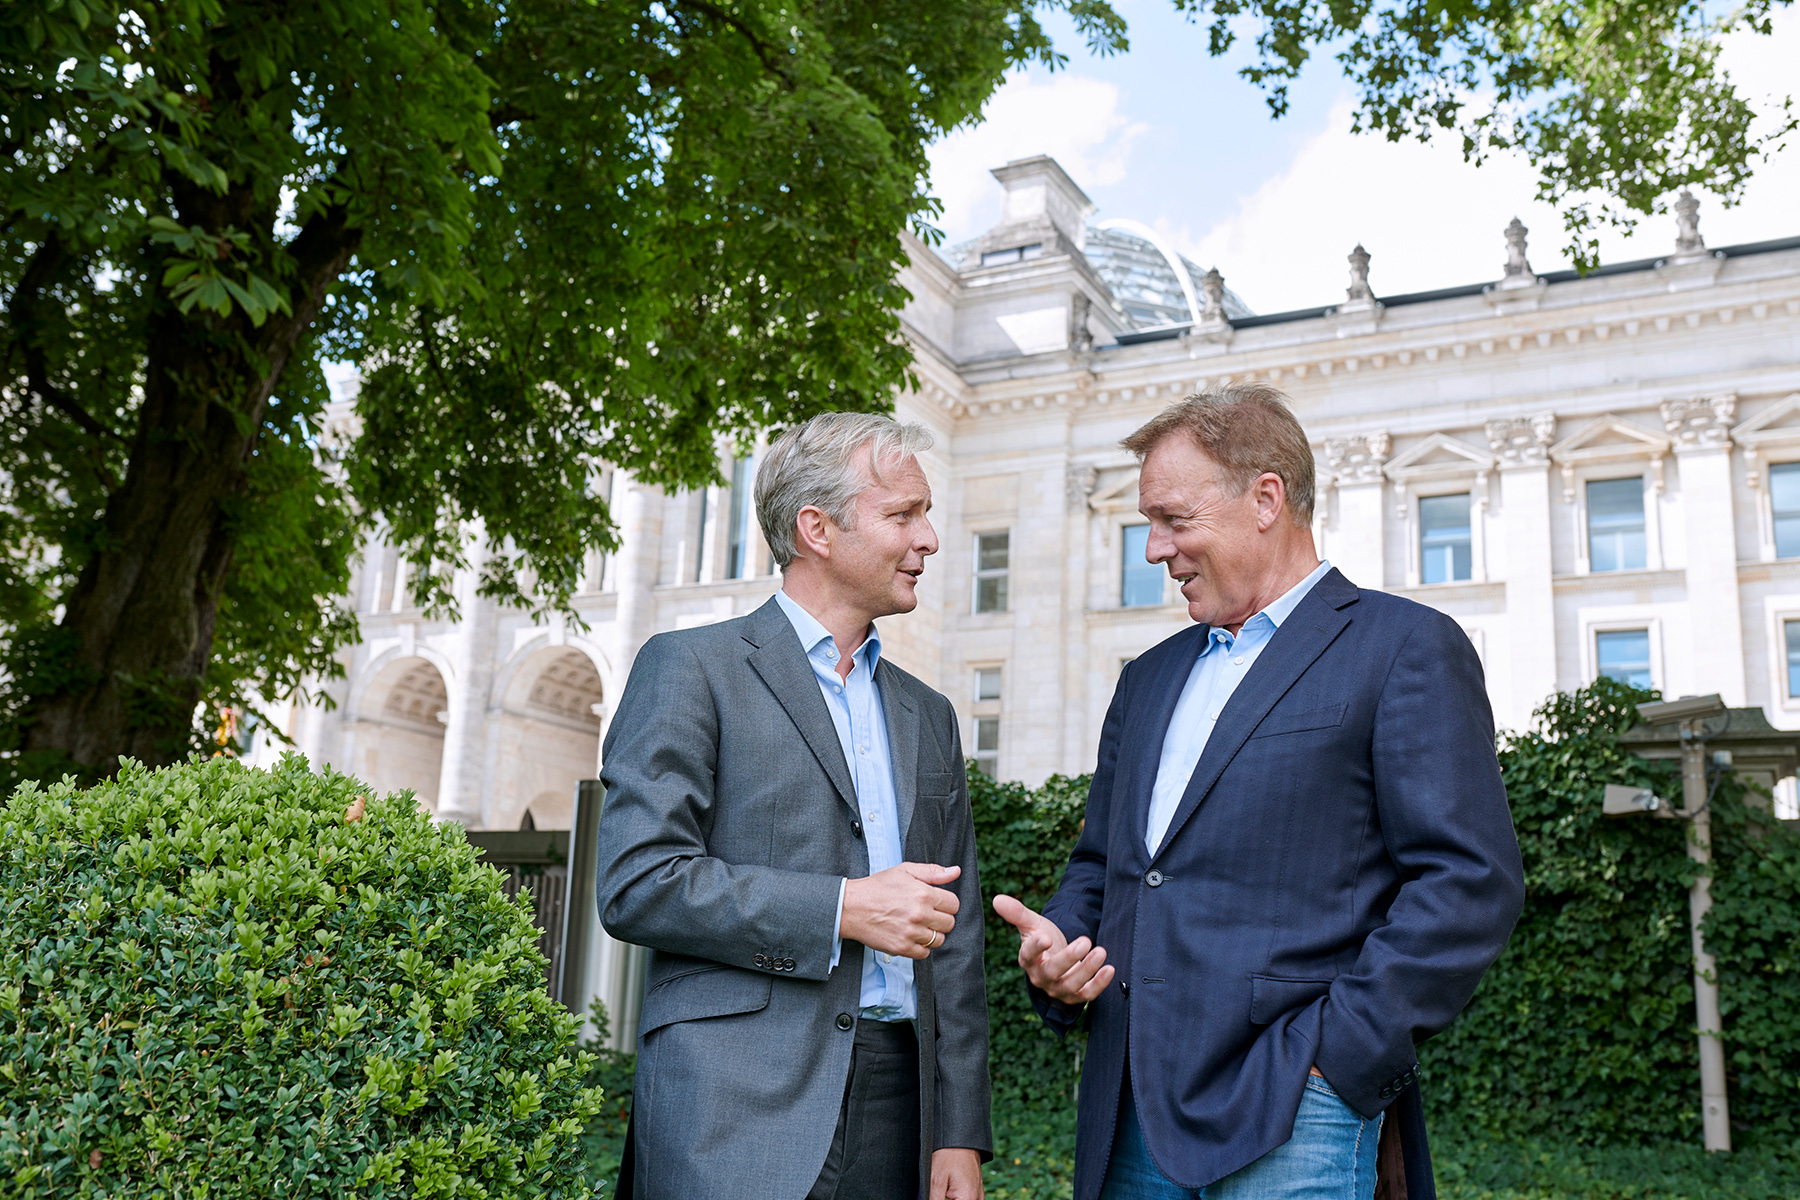  Dr. Matthias Redlefsen, Managing Director of Benary, and Thomas Oppermann, Vice Presient of the German Bundestag, discussing best places for BIGs in the Reichstag garden. 